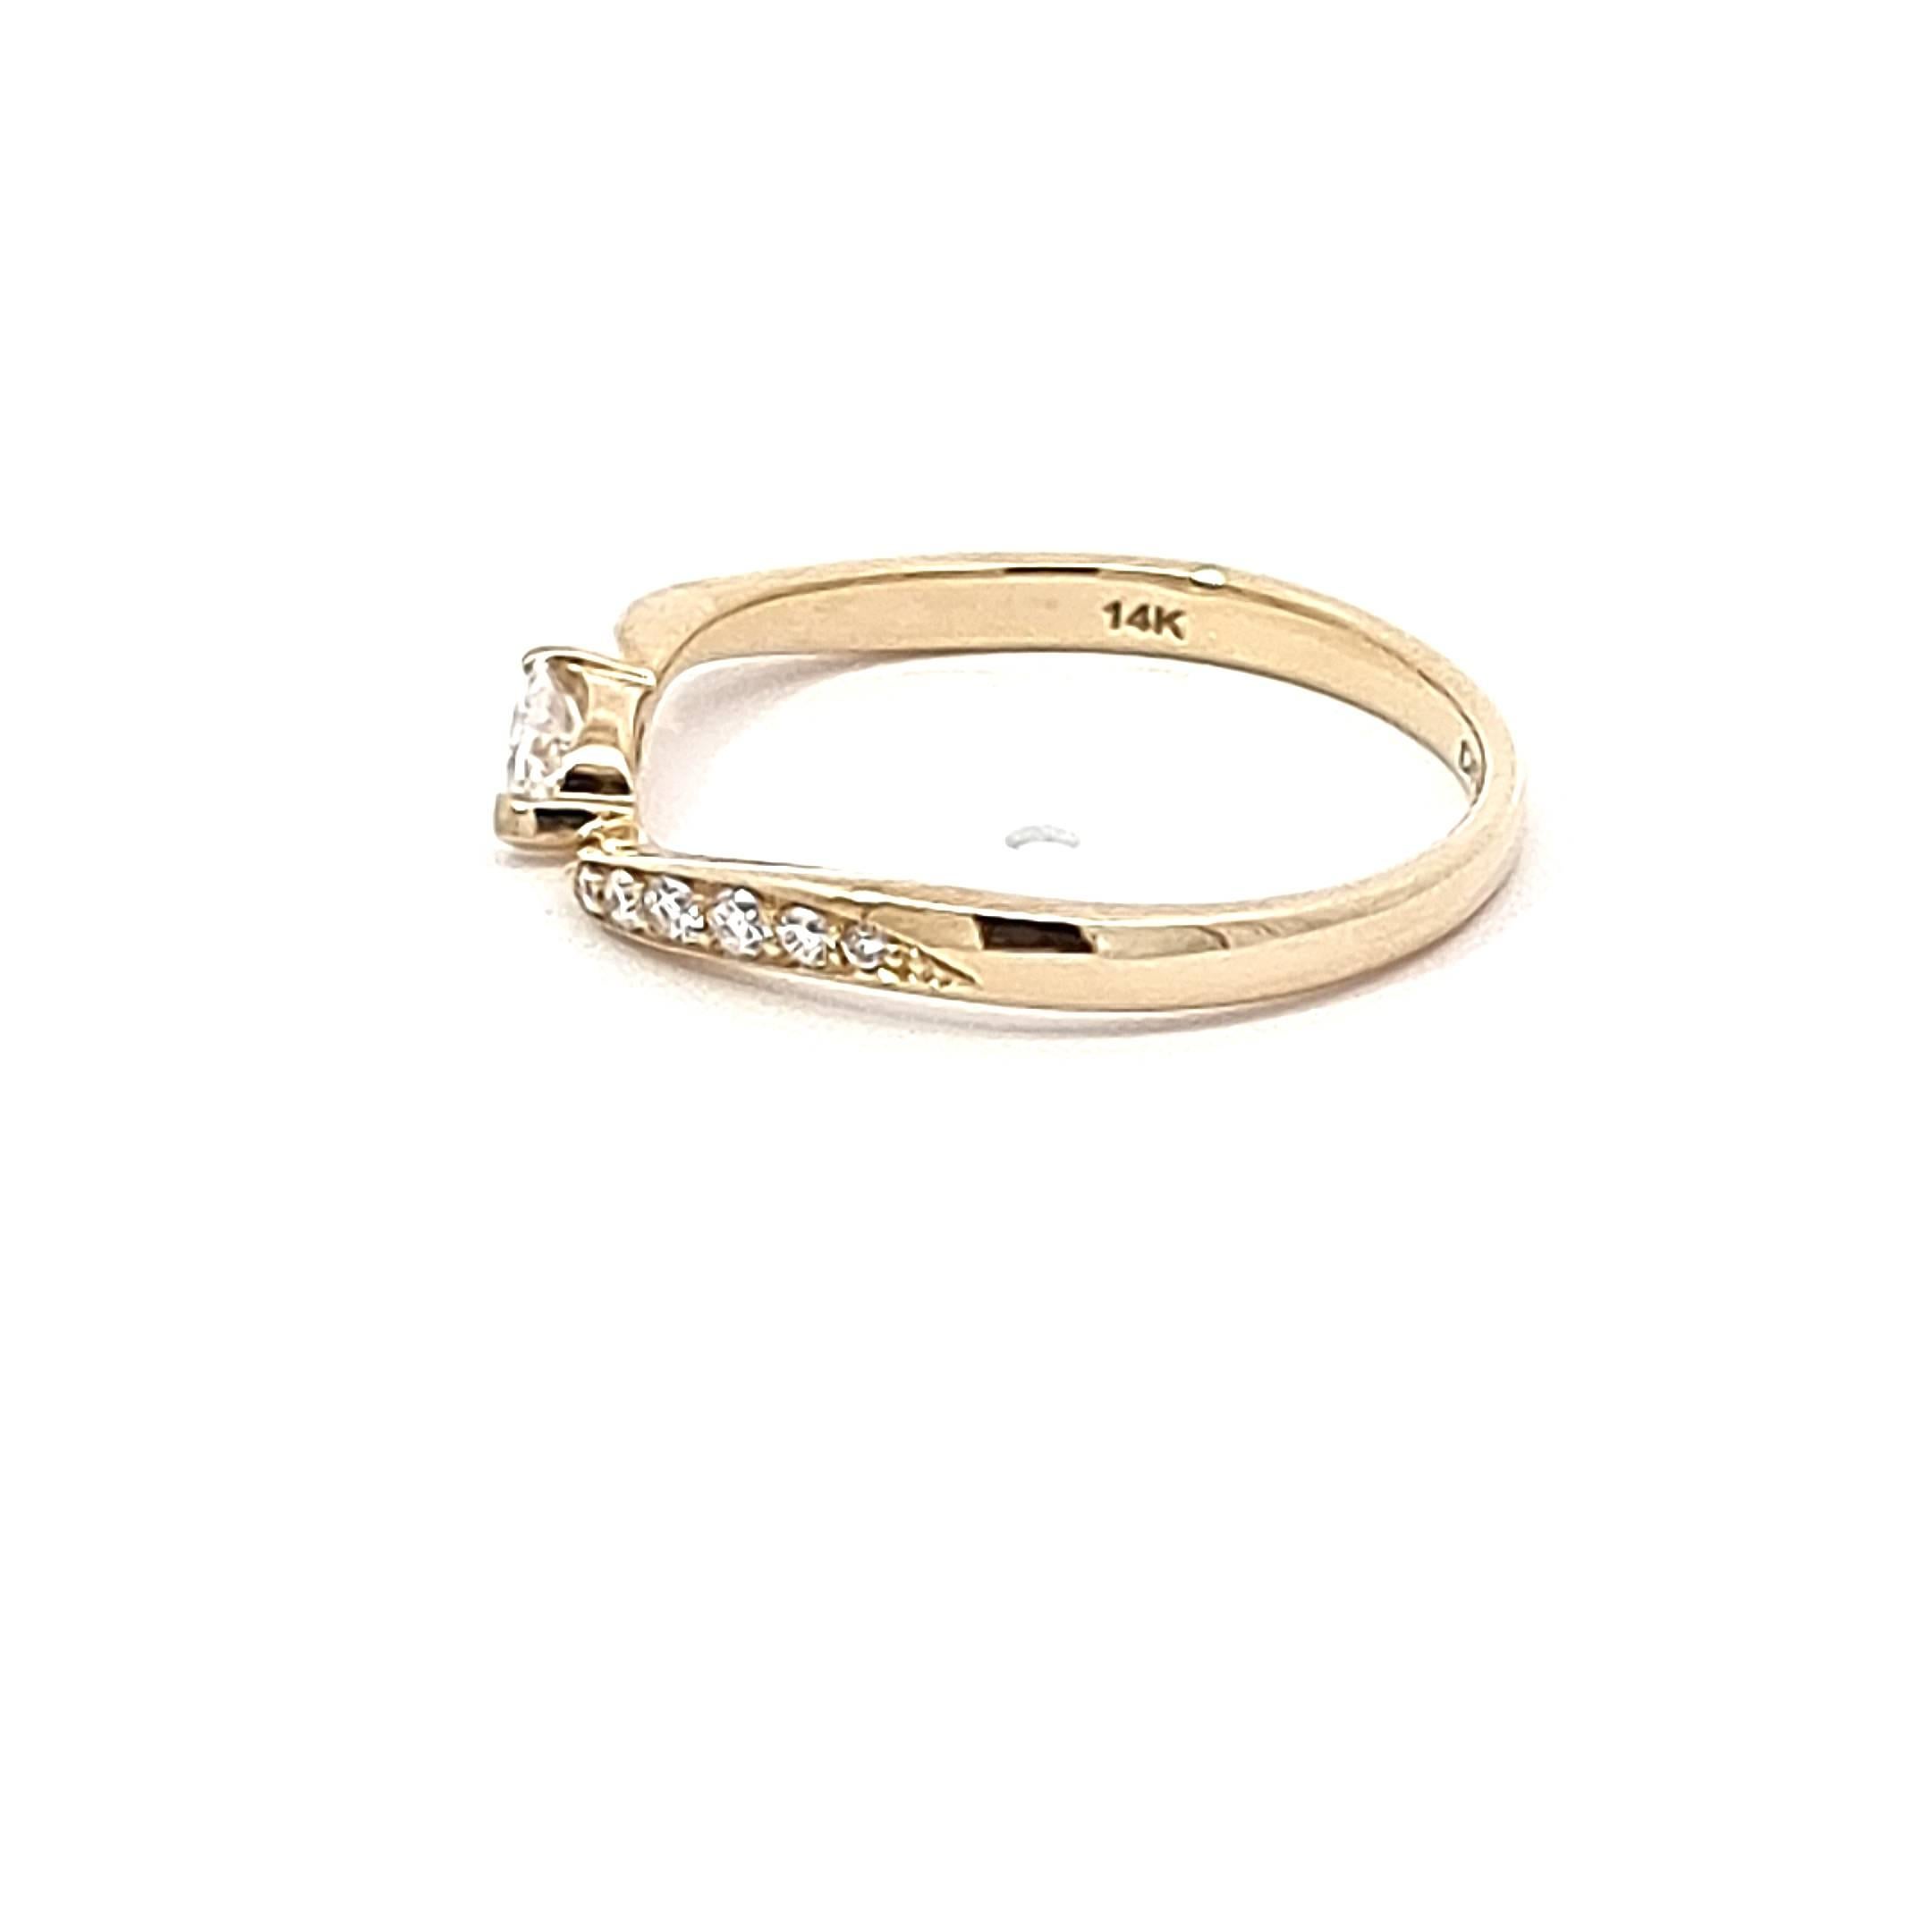 Adorn your finger with the timeless elegance of our 14K Yellow Gold Ring, a masterpiece of design and craftsmanship. The curvaceous shank adds a touch of whimsy to this sophisticated piece, creating an aesthetic harmony. At the heart of the ring, a